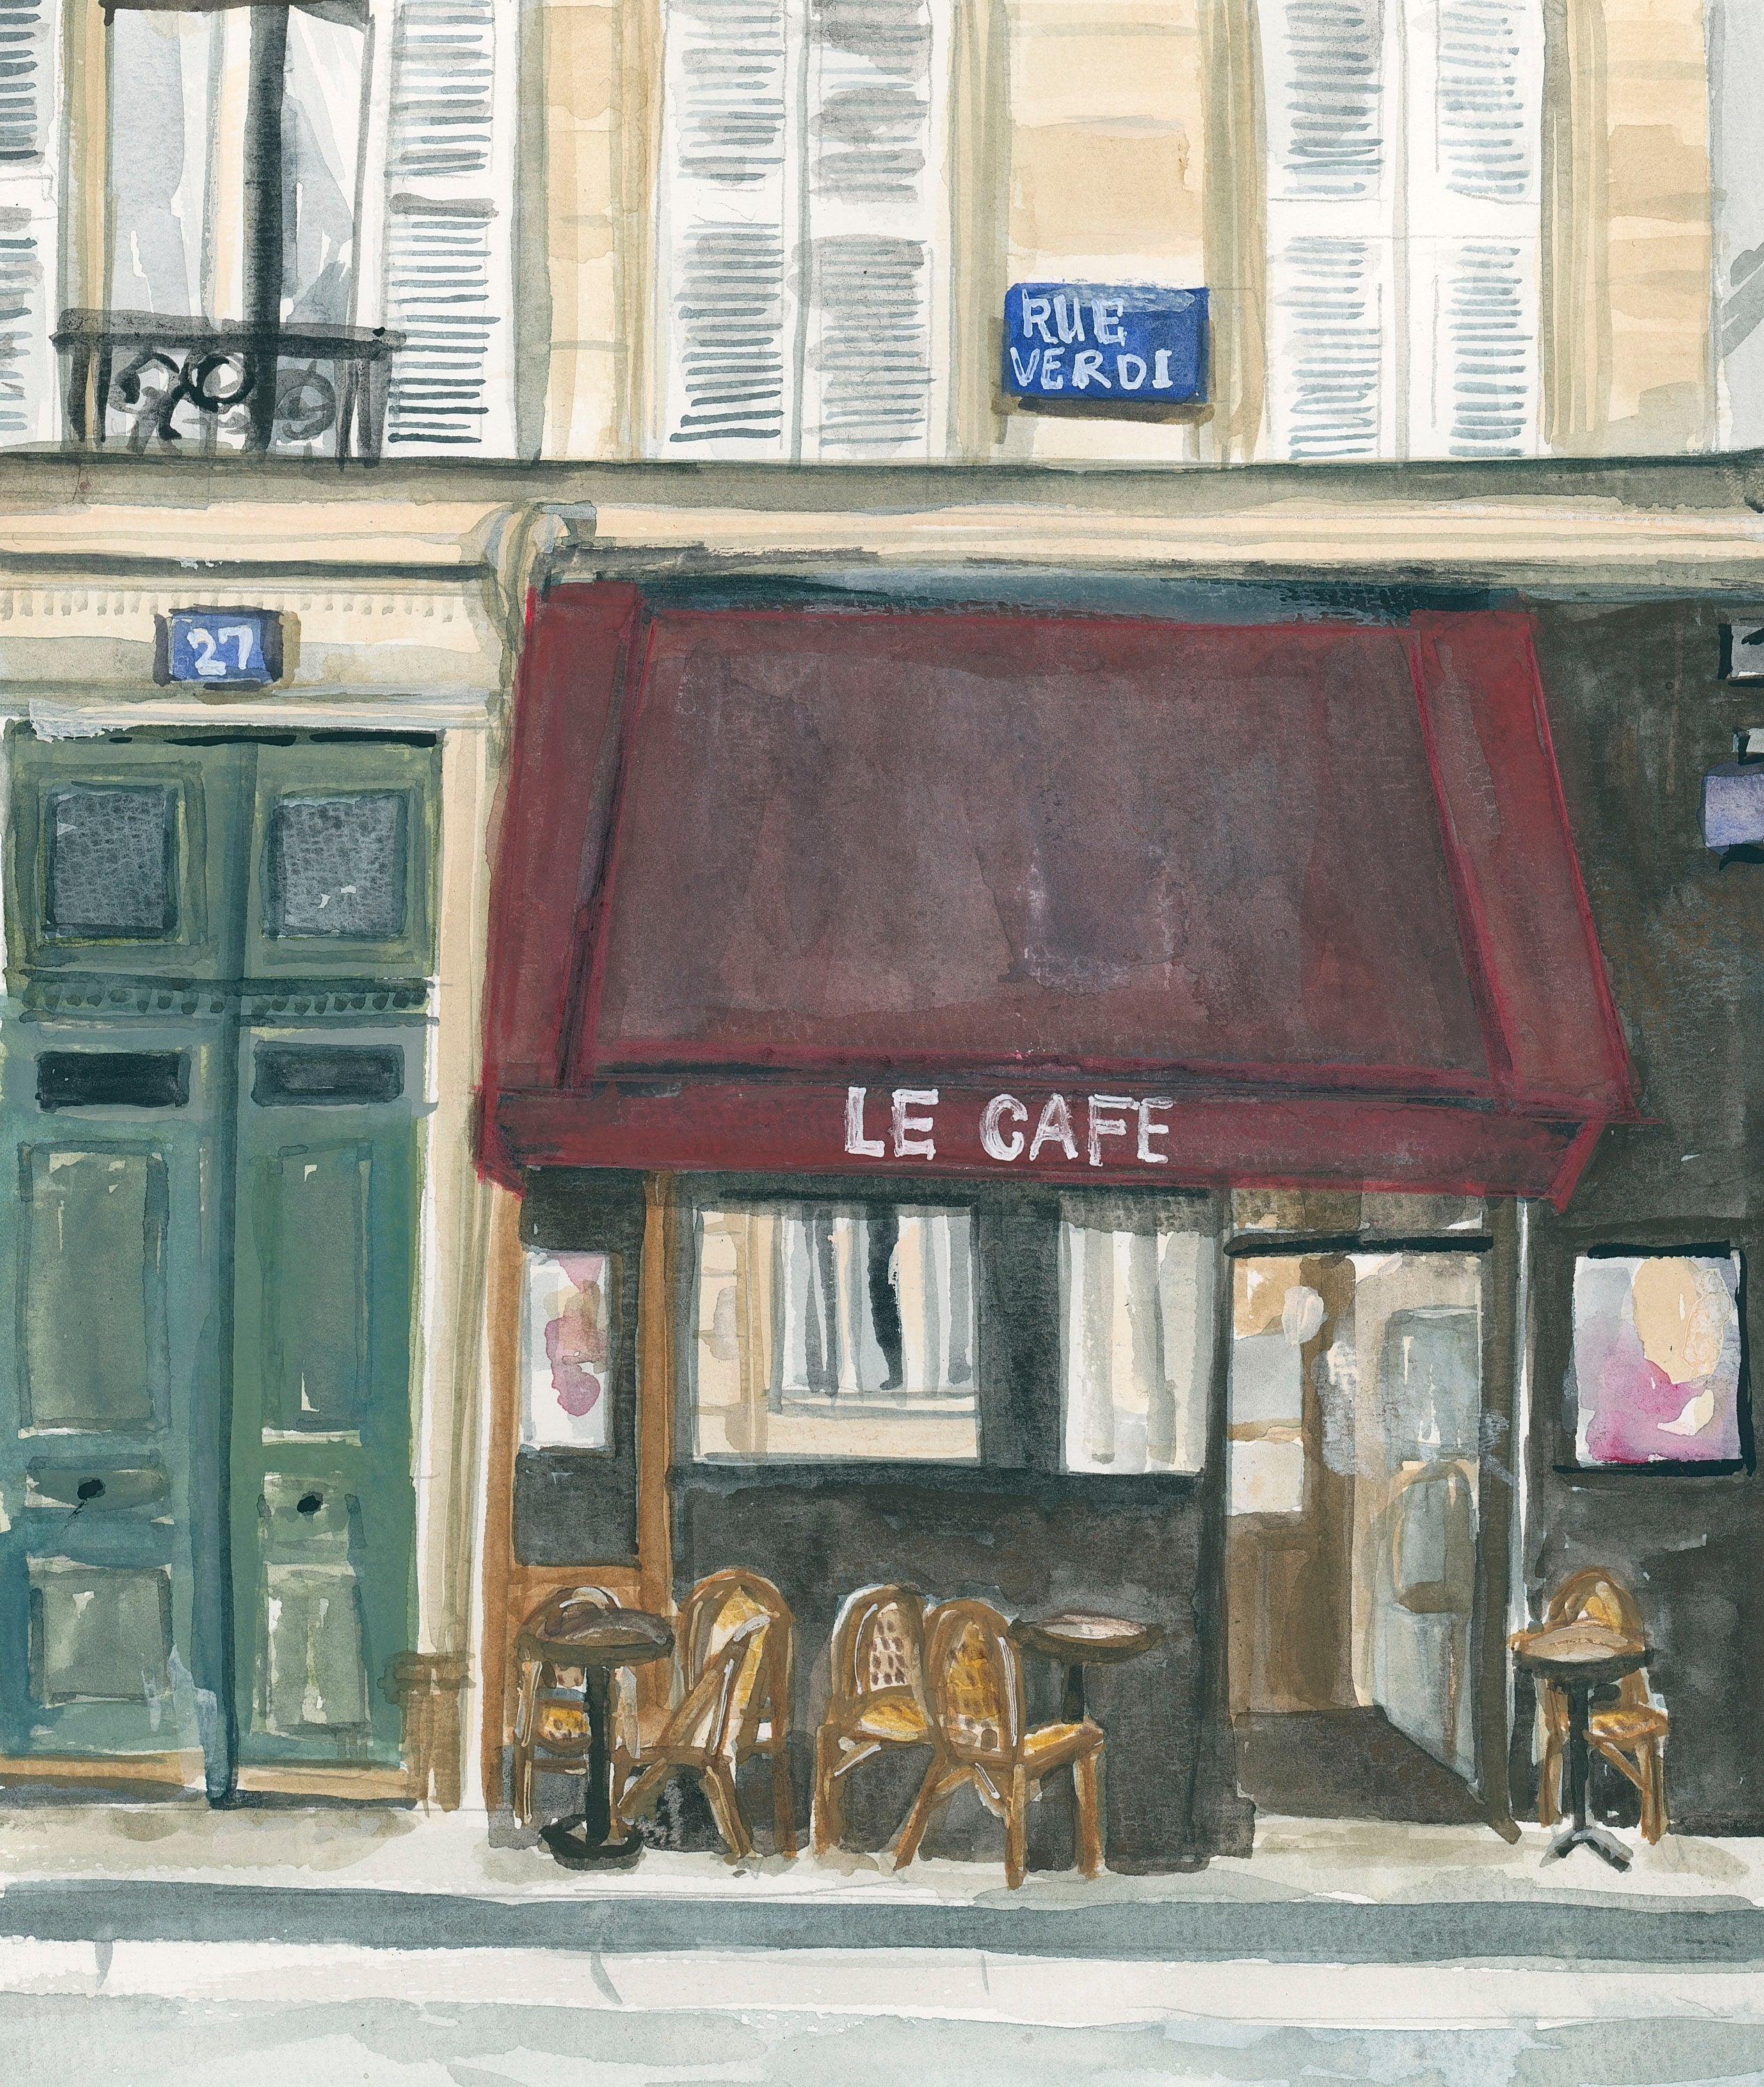 Paris cafe print of painting by Medjool Studio. Print of original gouache painting of the front of a small cafe in Paris, France featuring a burgundy awning, small tables and chairs out front.